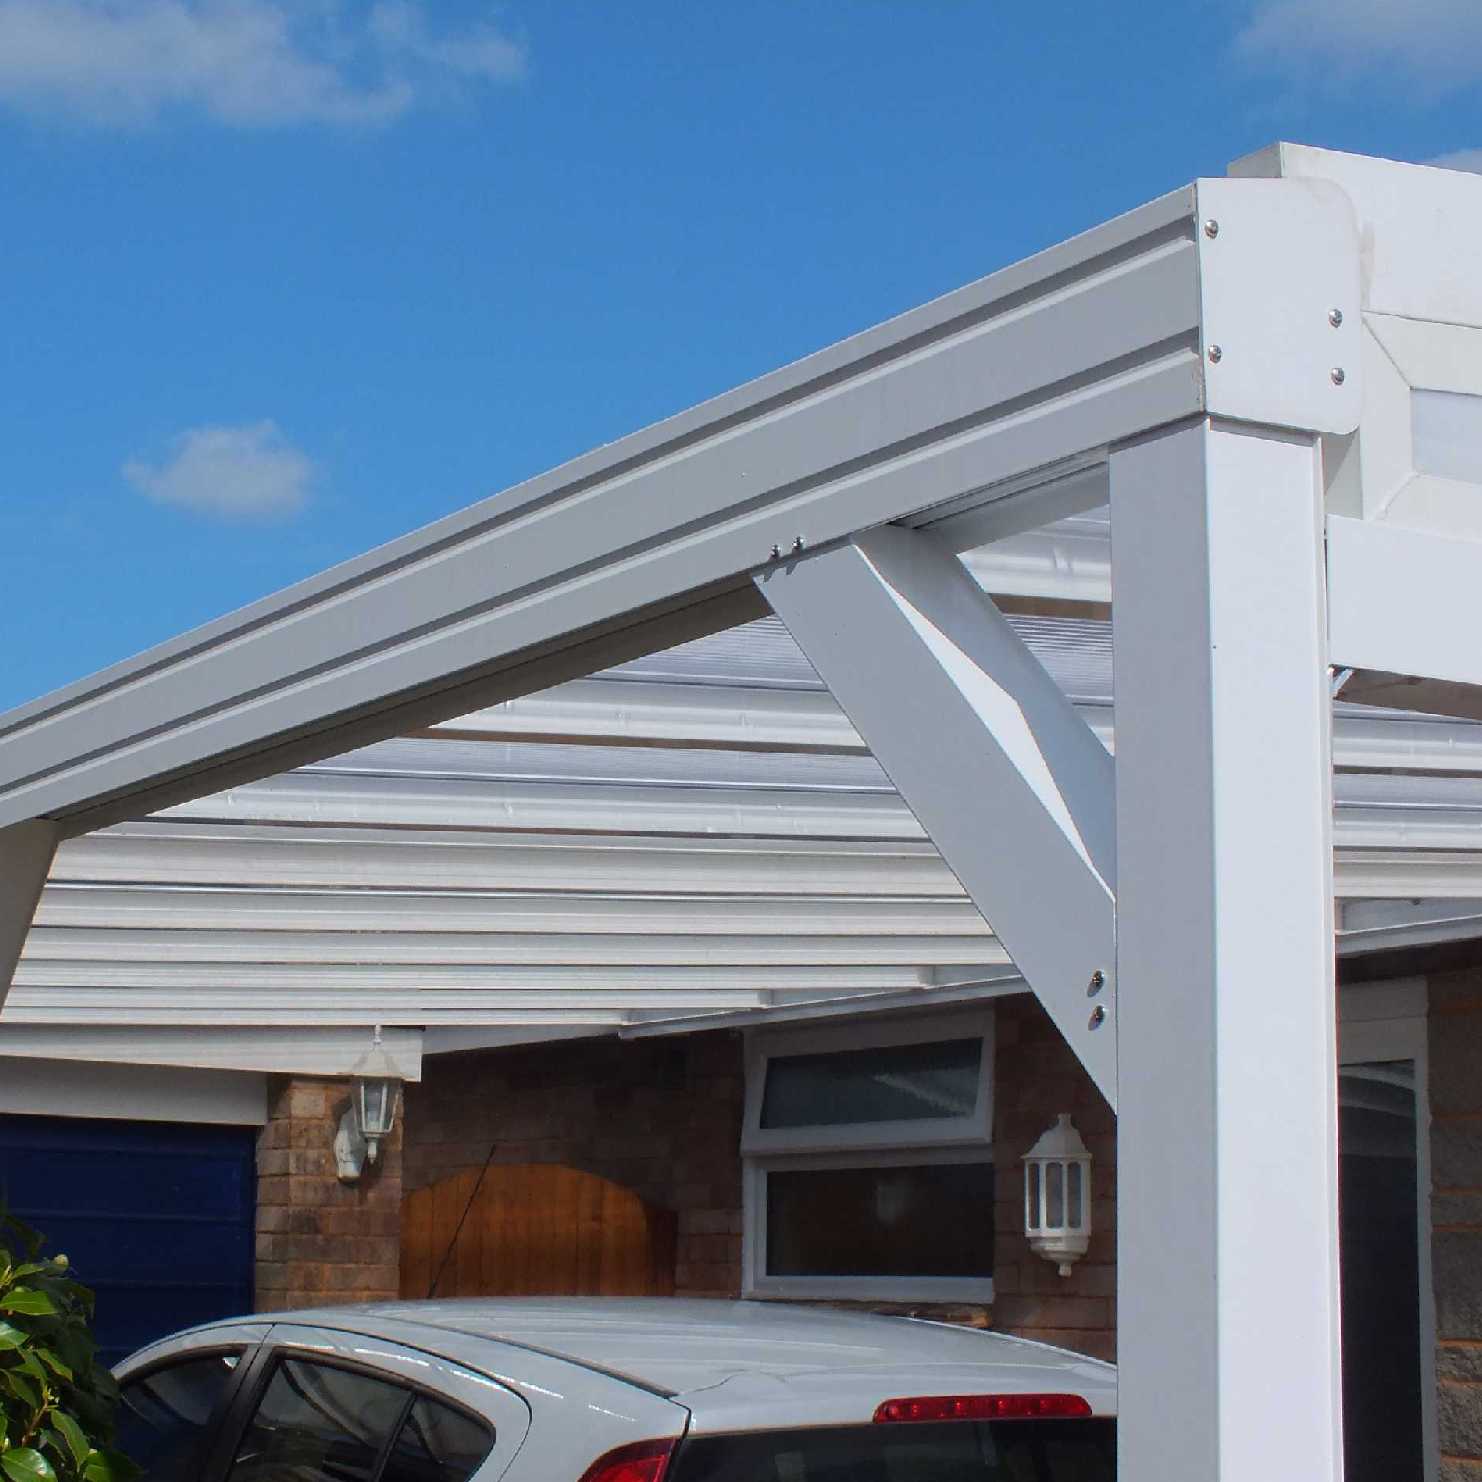 Buy Omega Smart Lean-To Canopy, White with 16mm Polycarbonate Glazing - 5.2m (W) x 3.0m (P), (3) Supporting Posts online today